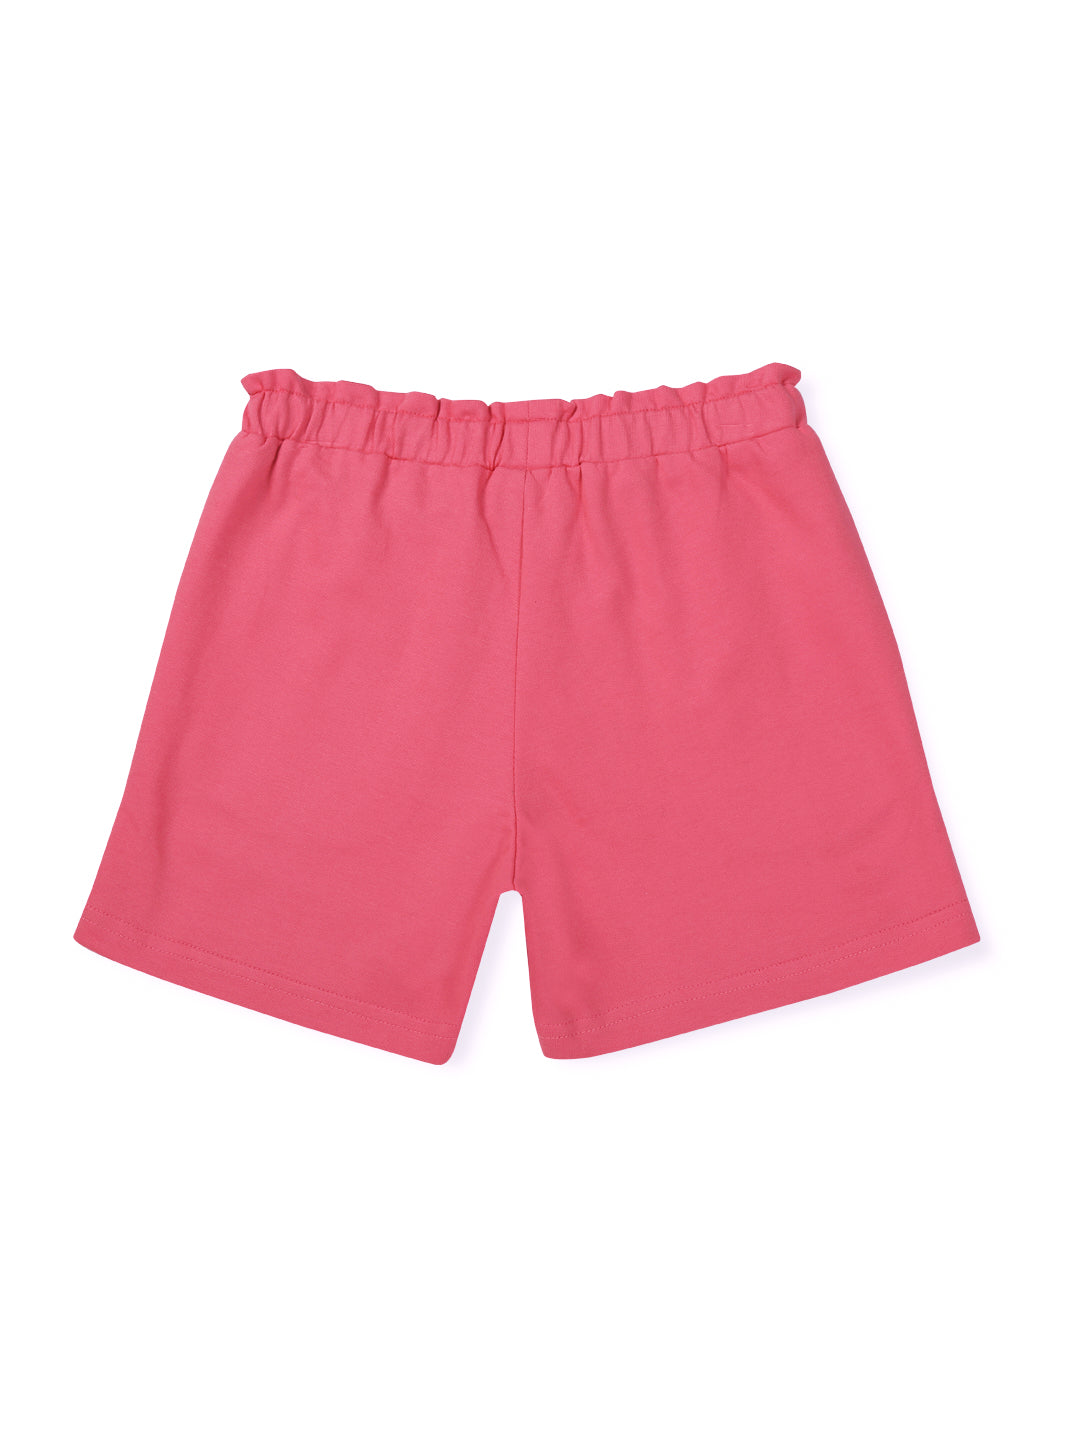 Girls Pink Cotton Solid Shorts